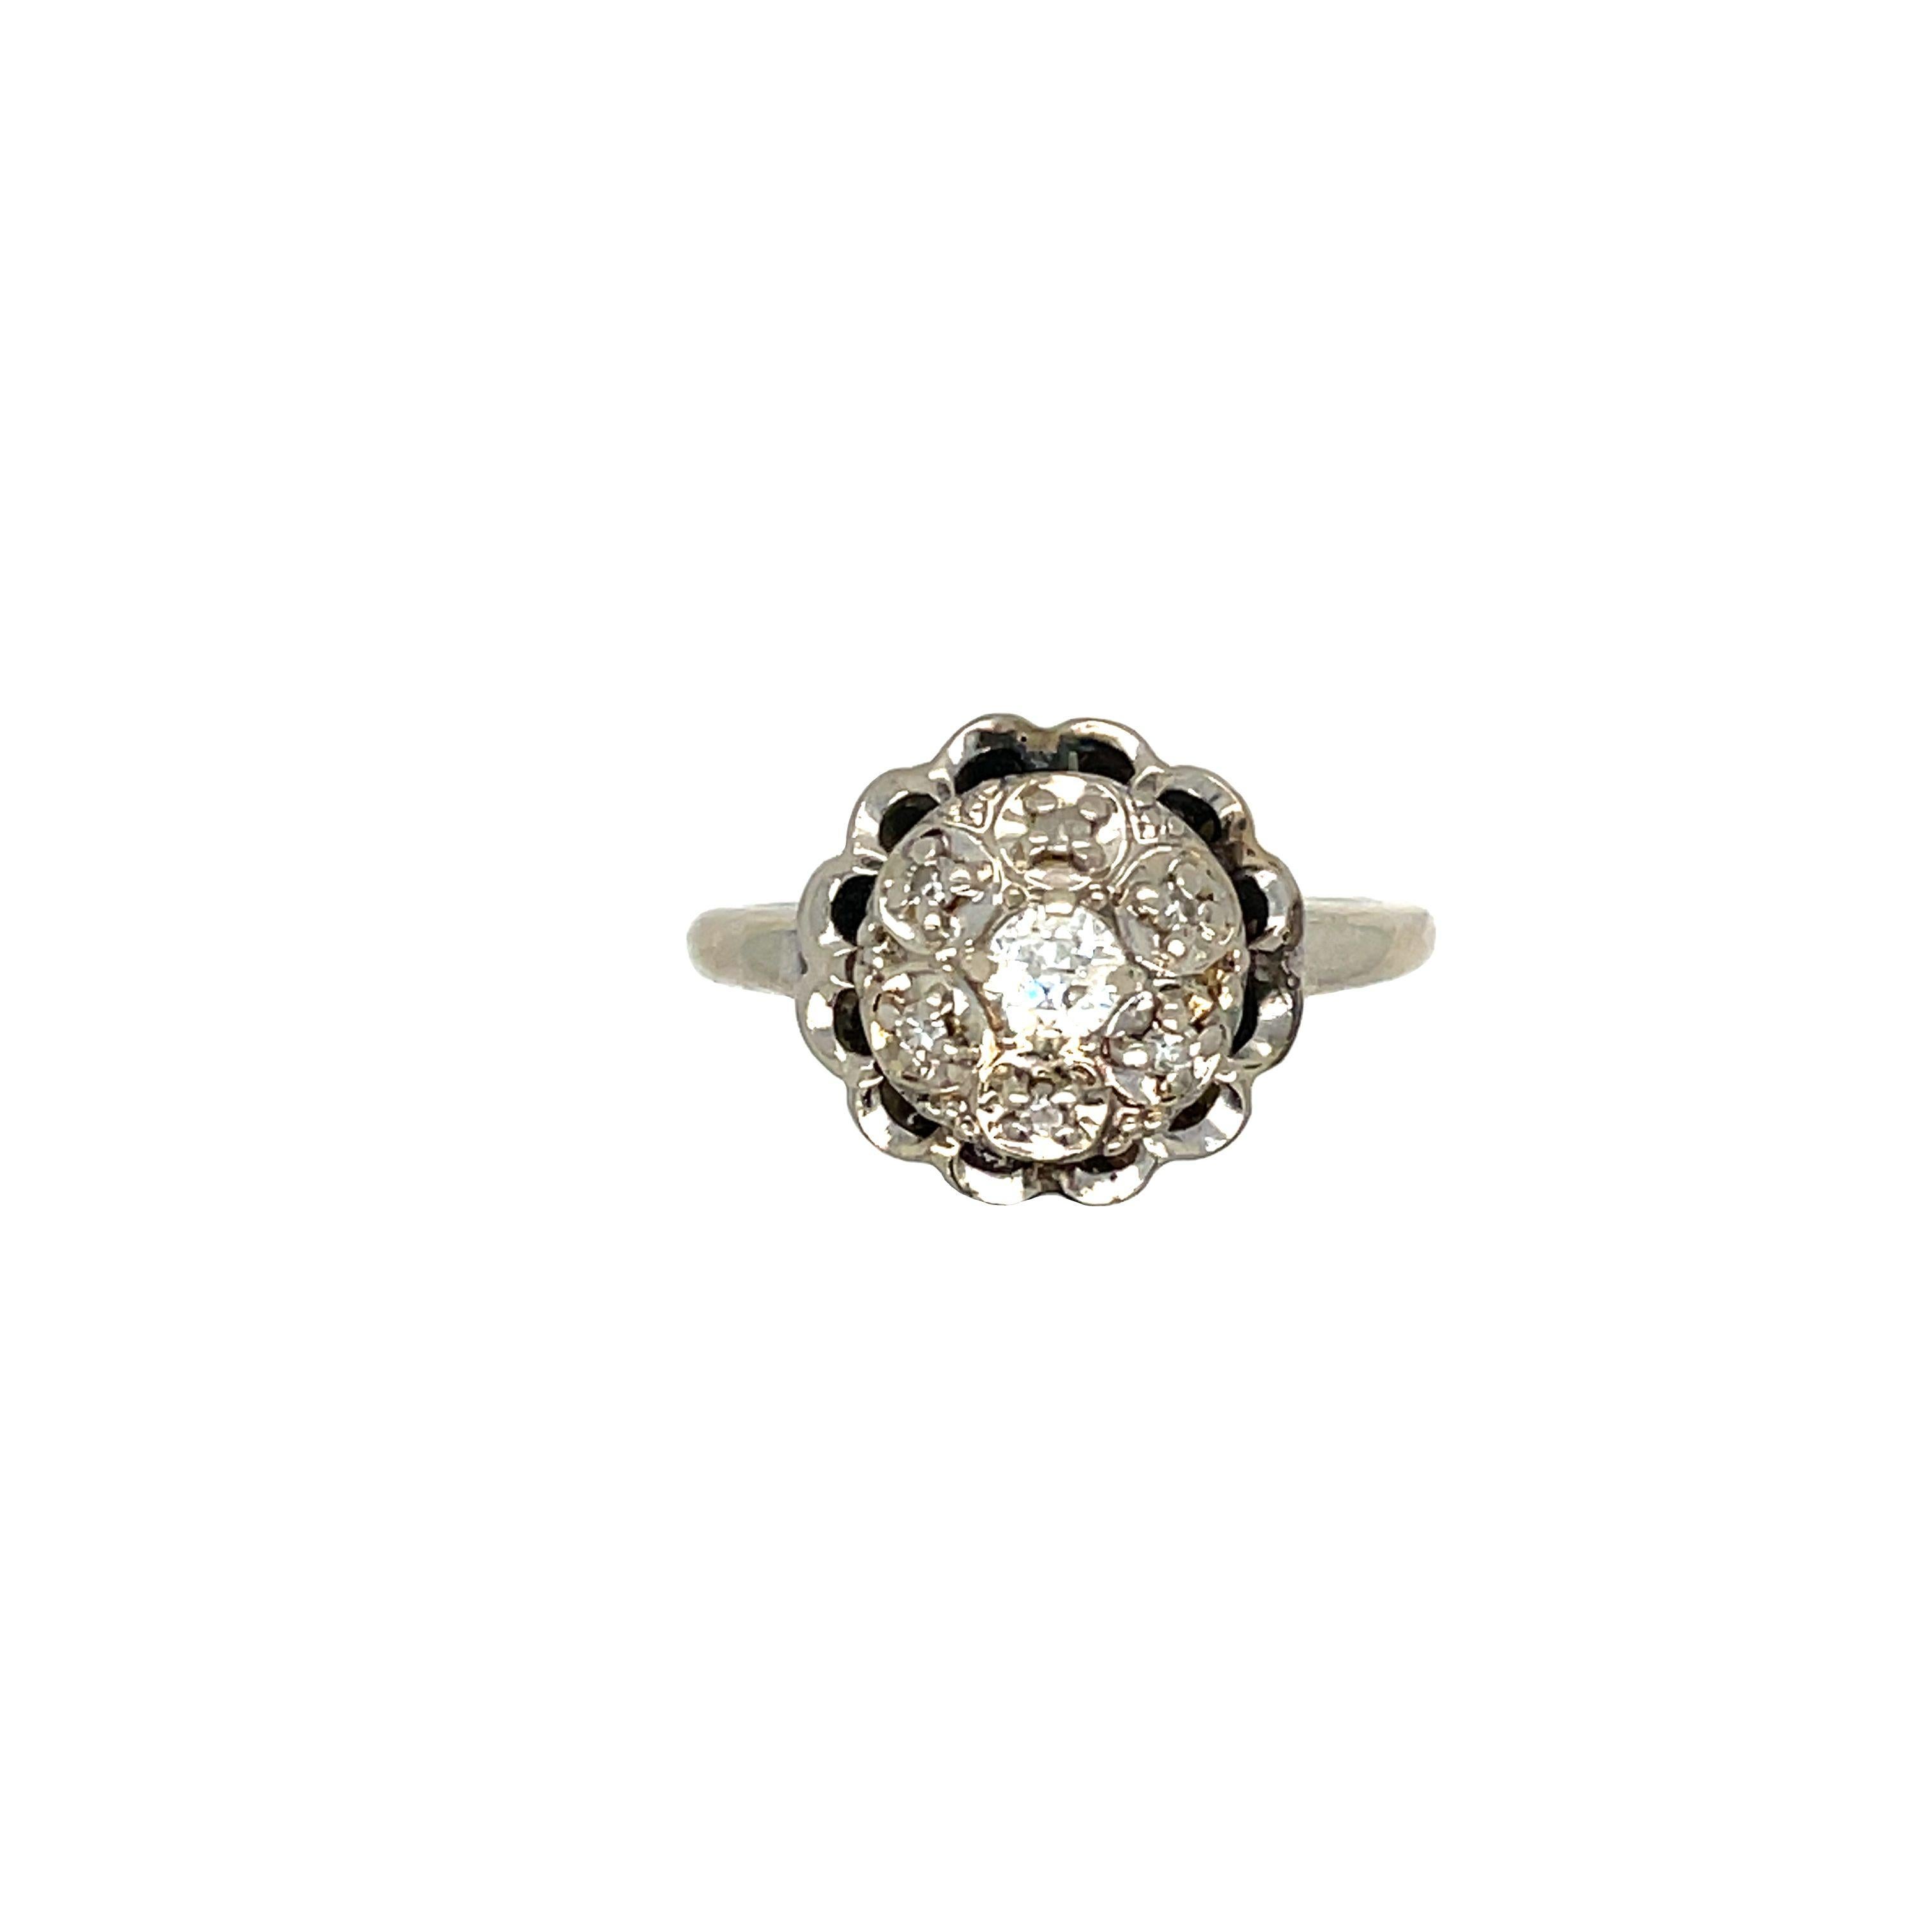 A show-stopping antique 14K white gold diamond cluster ring. 
The piece features 7 old European cut diamonds, which in total weight 0.20 carat with G-H color and VS2 clarity. This vintage beauty features a captivating centerpiece: a sparkling old